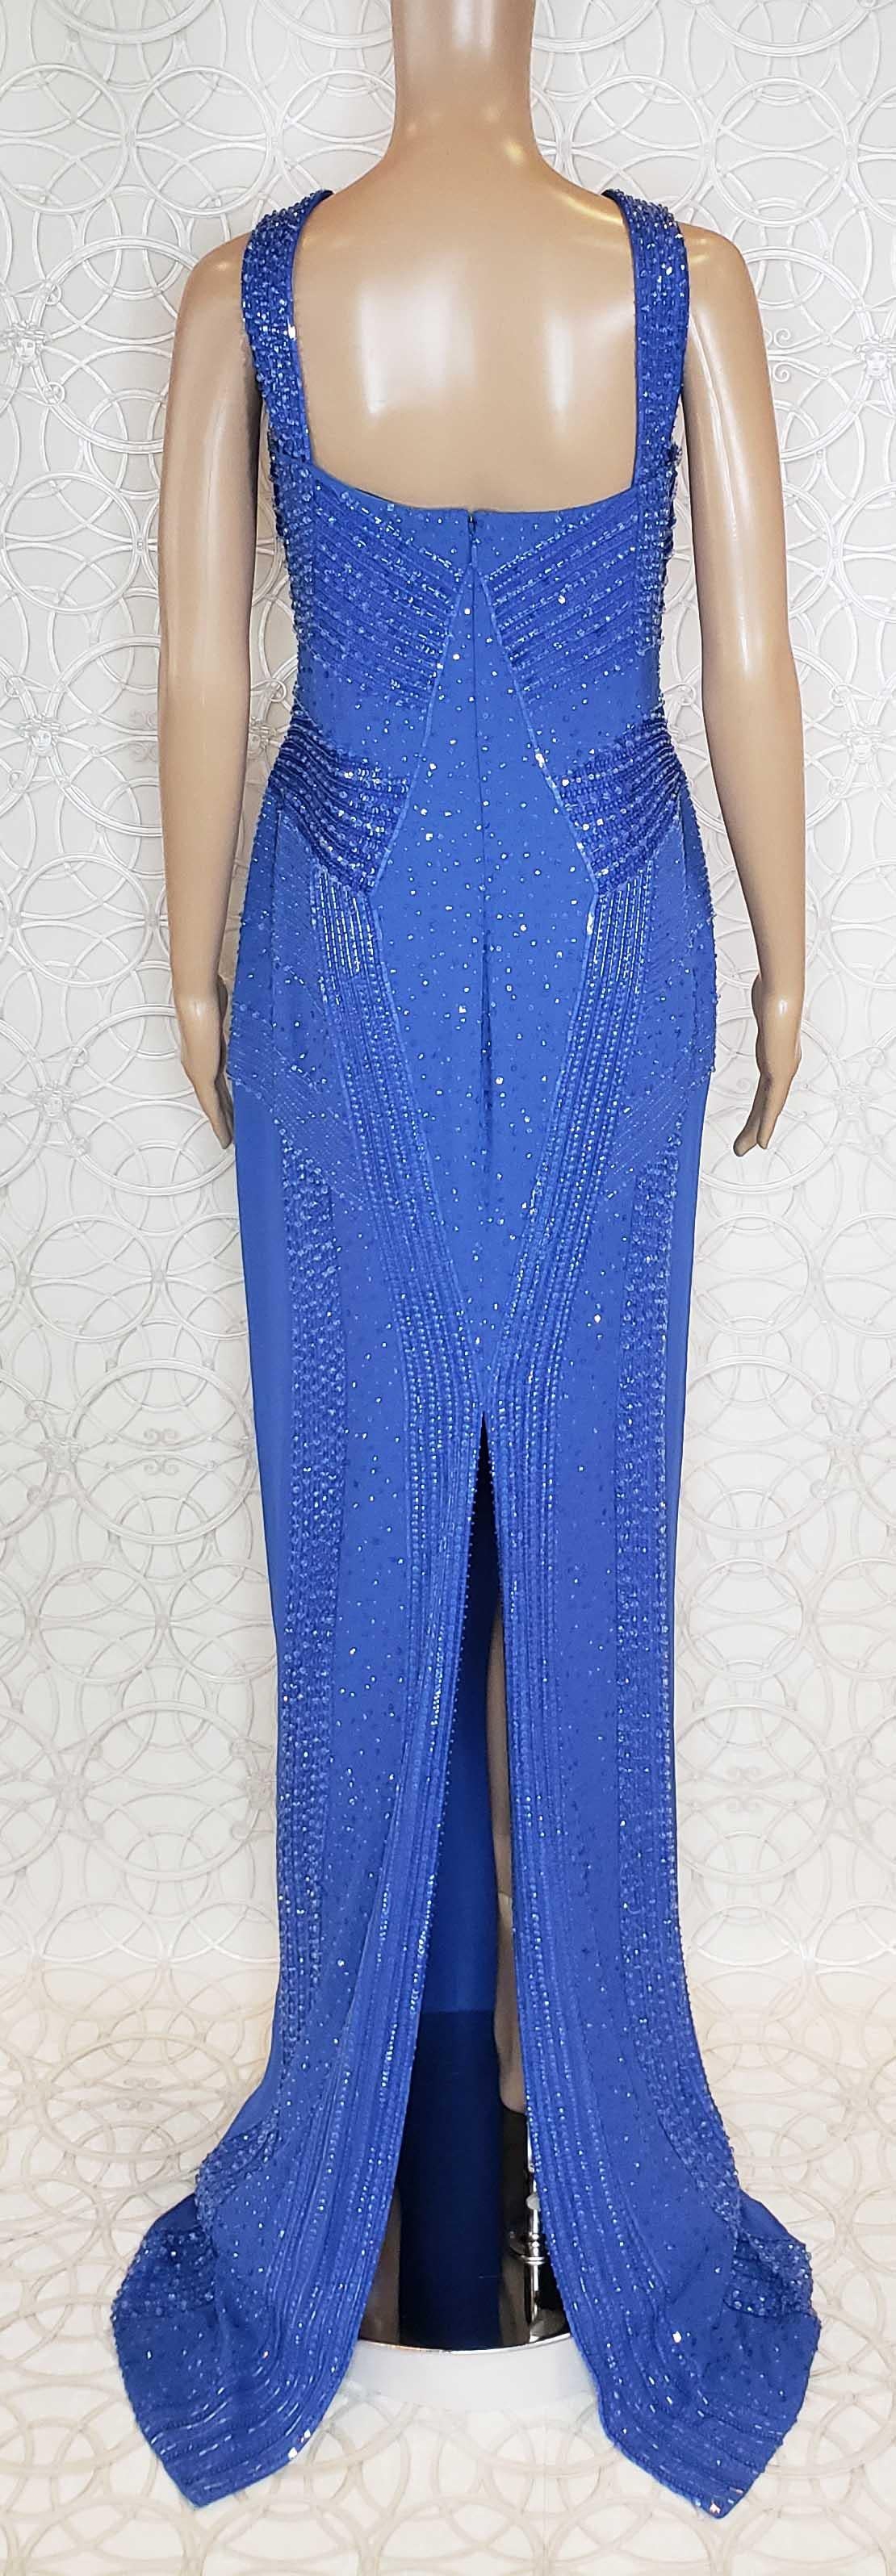 $12, 575 NEW VERSACE EMBELLISHED BLUE Gown 44 - 8 3